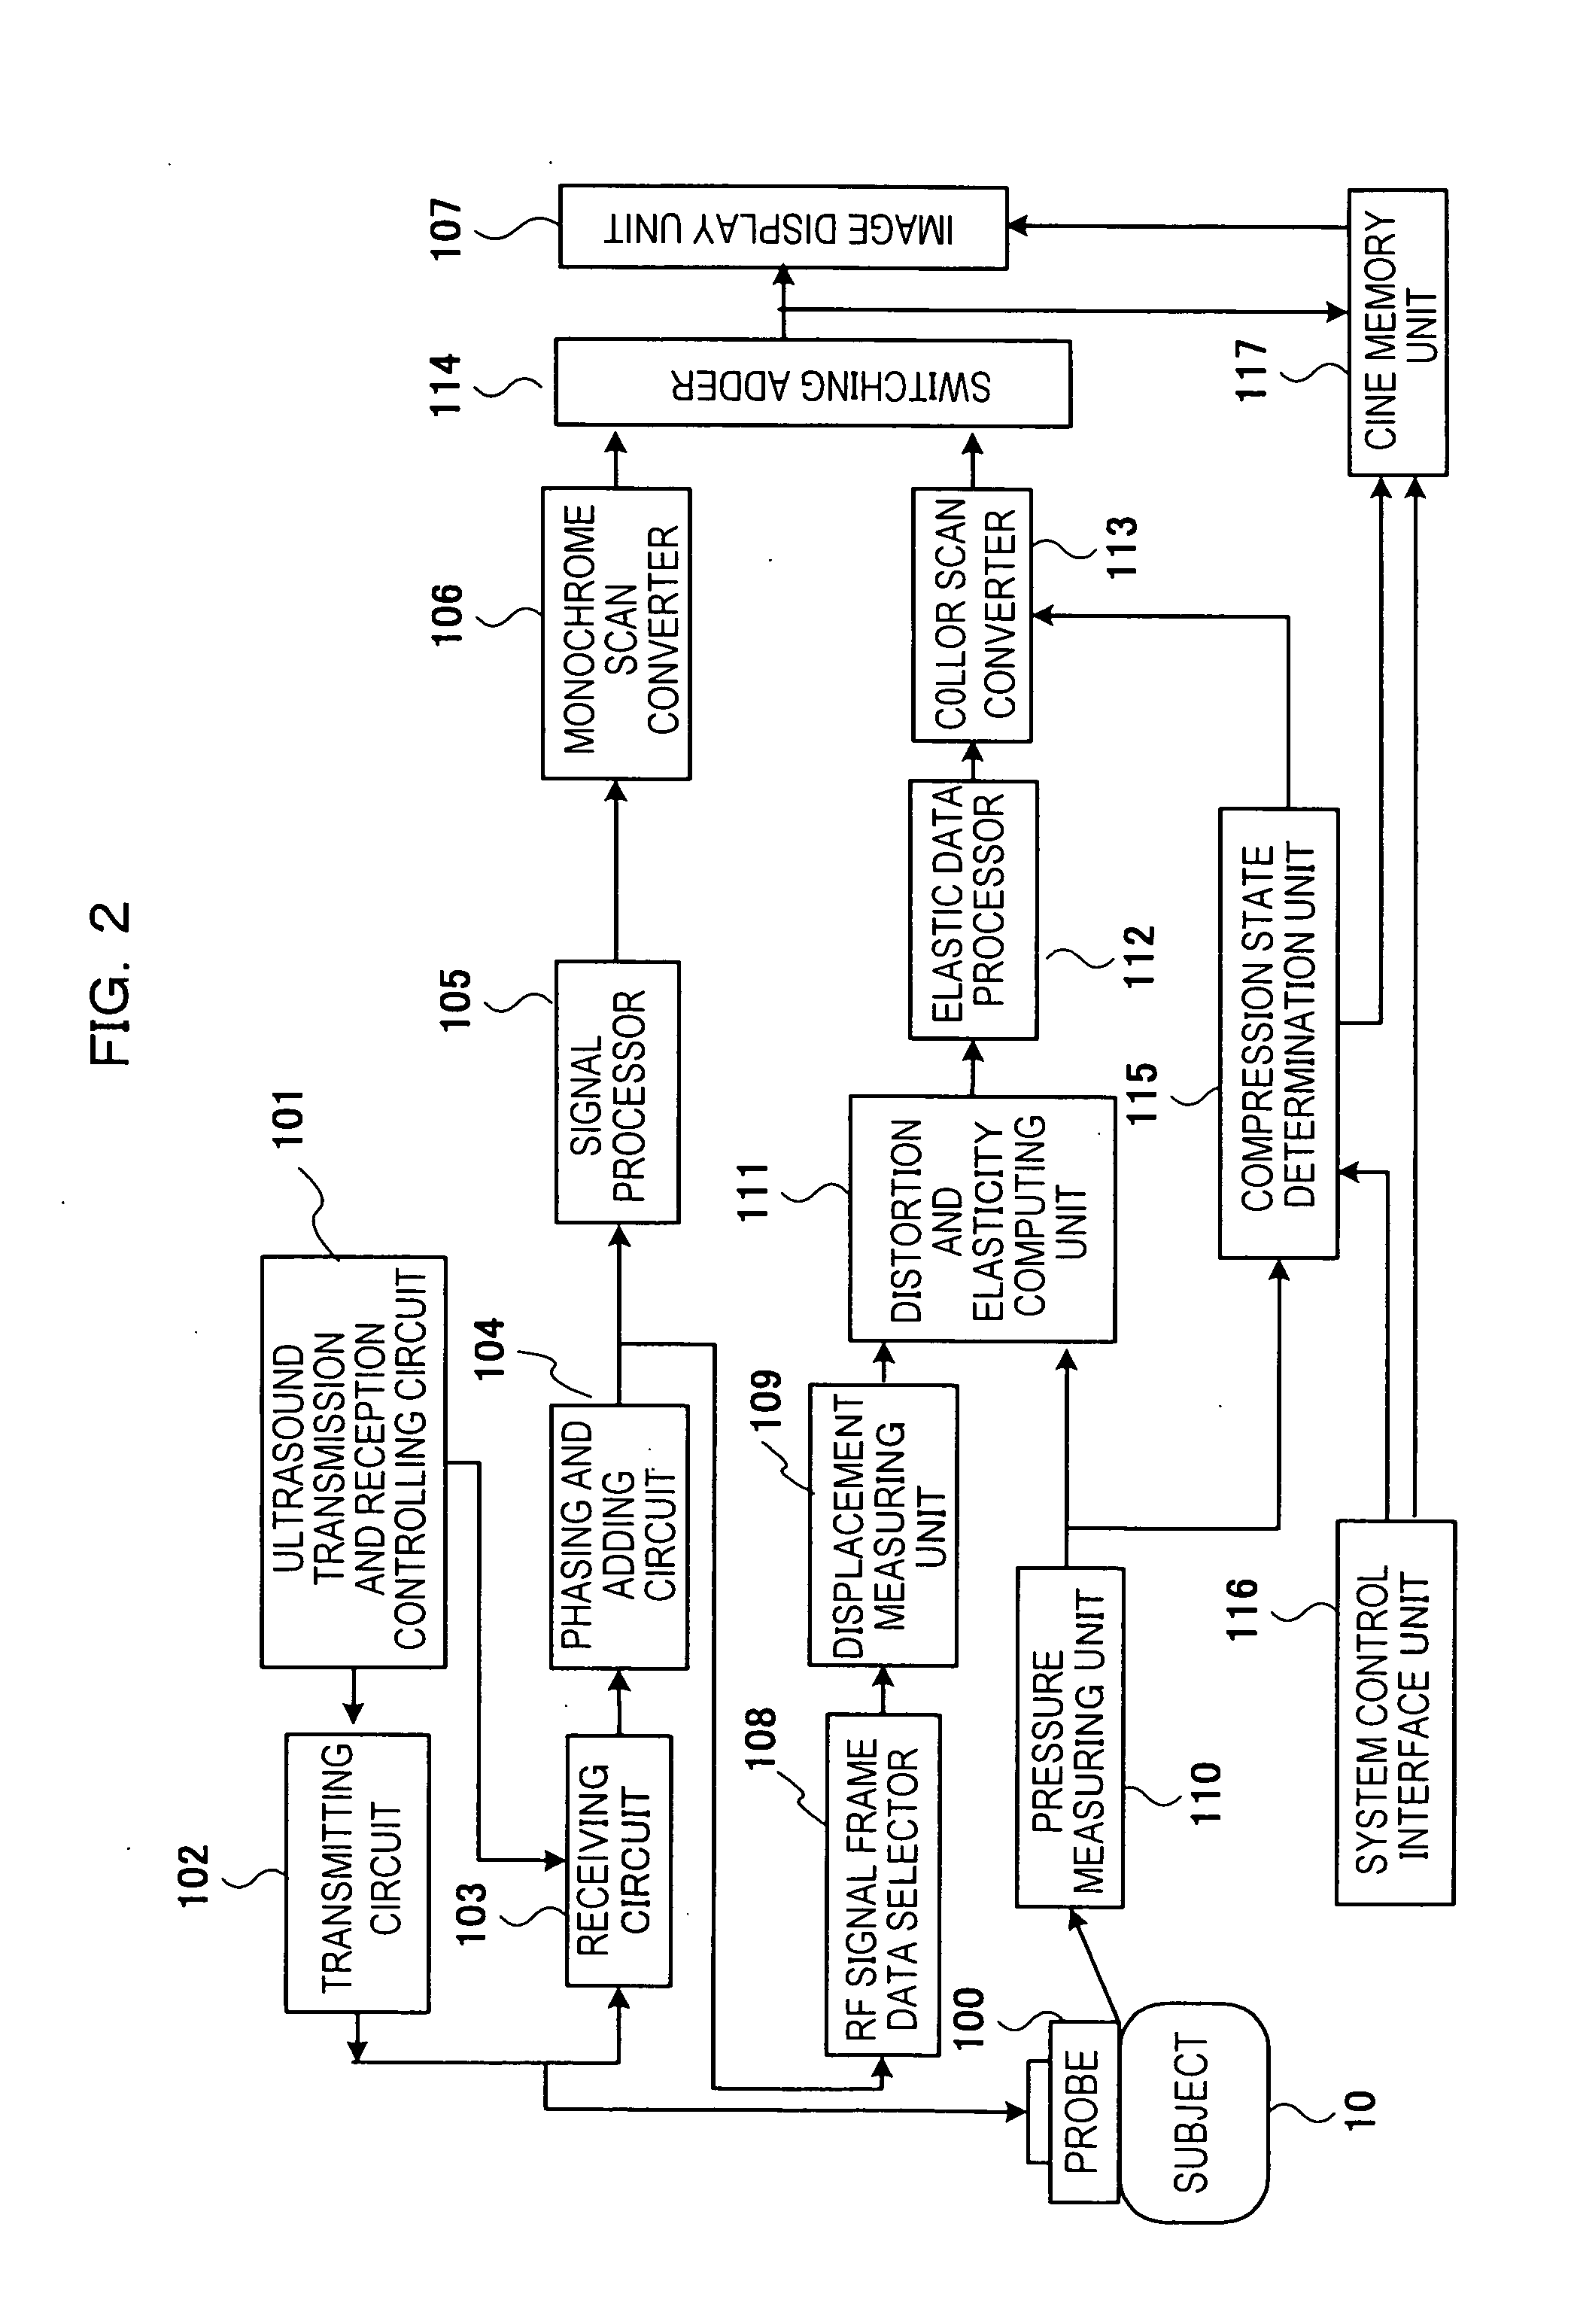 Method of Displaying Elastic Image and Diagnostic Ultrasound System